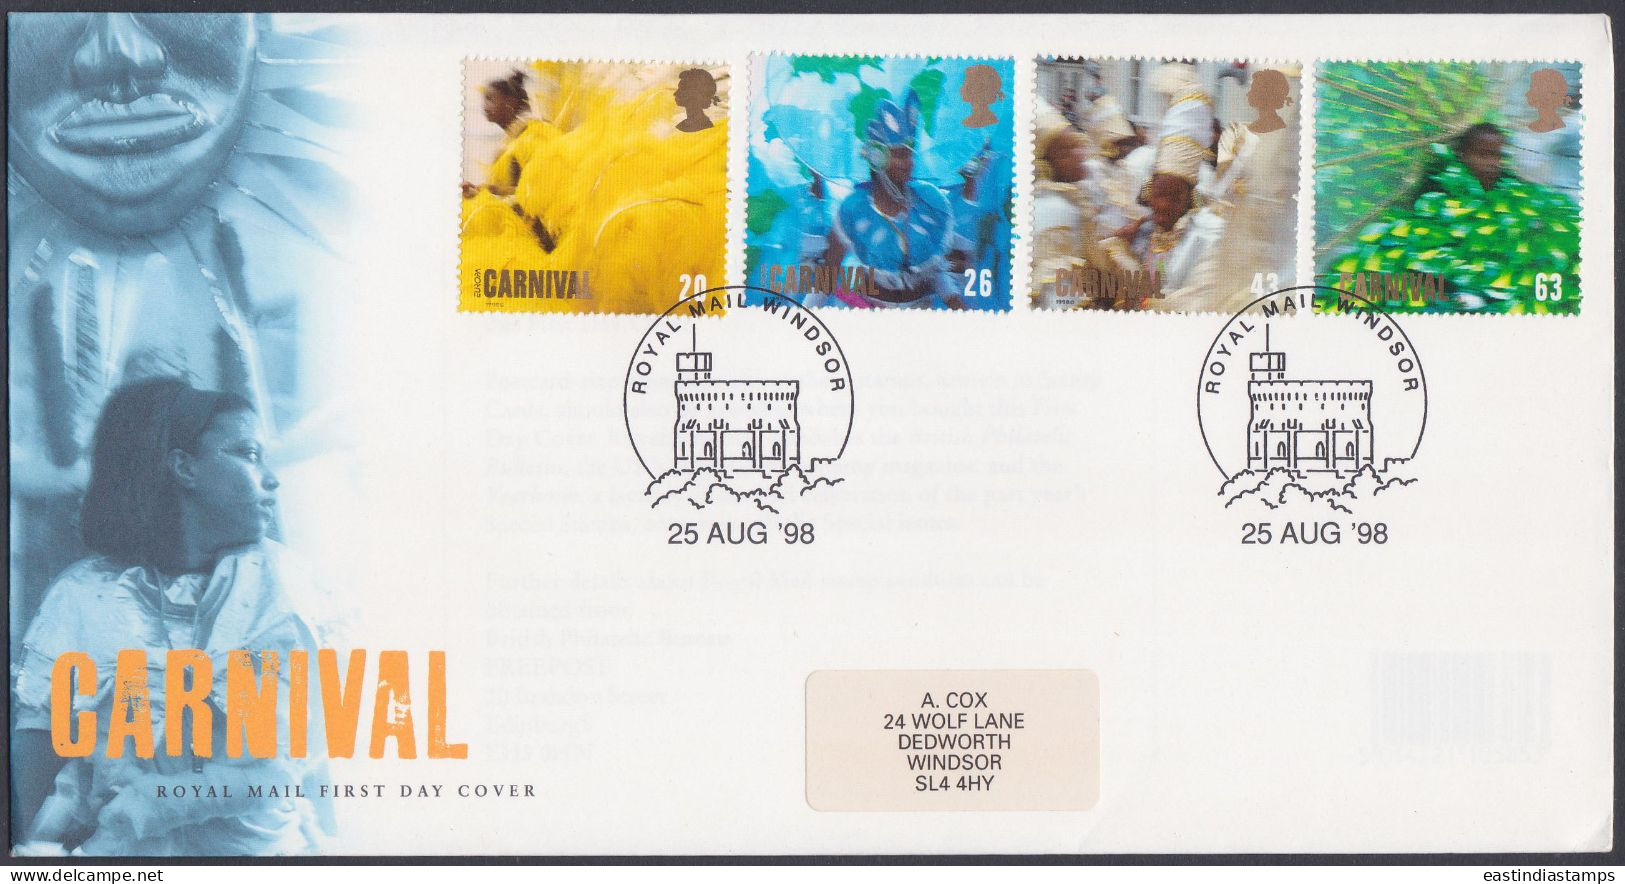 GB Great Britain 1998 FDC Carnival, Festival, Revelry, Music, Culture, Pictorial Postmark, First Day Cover - Brieven En Documenten